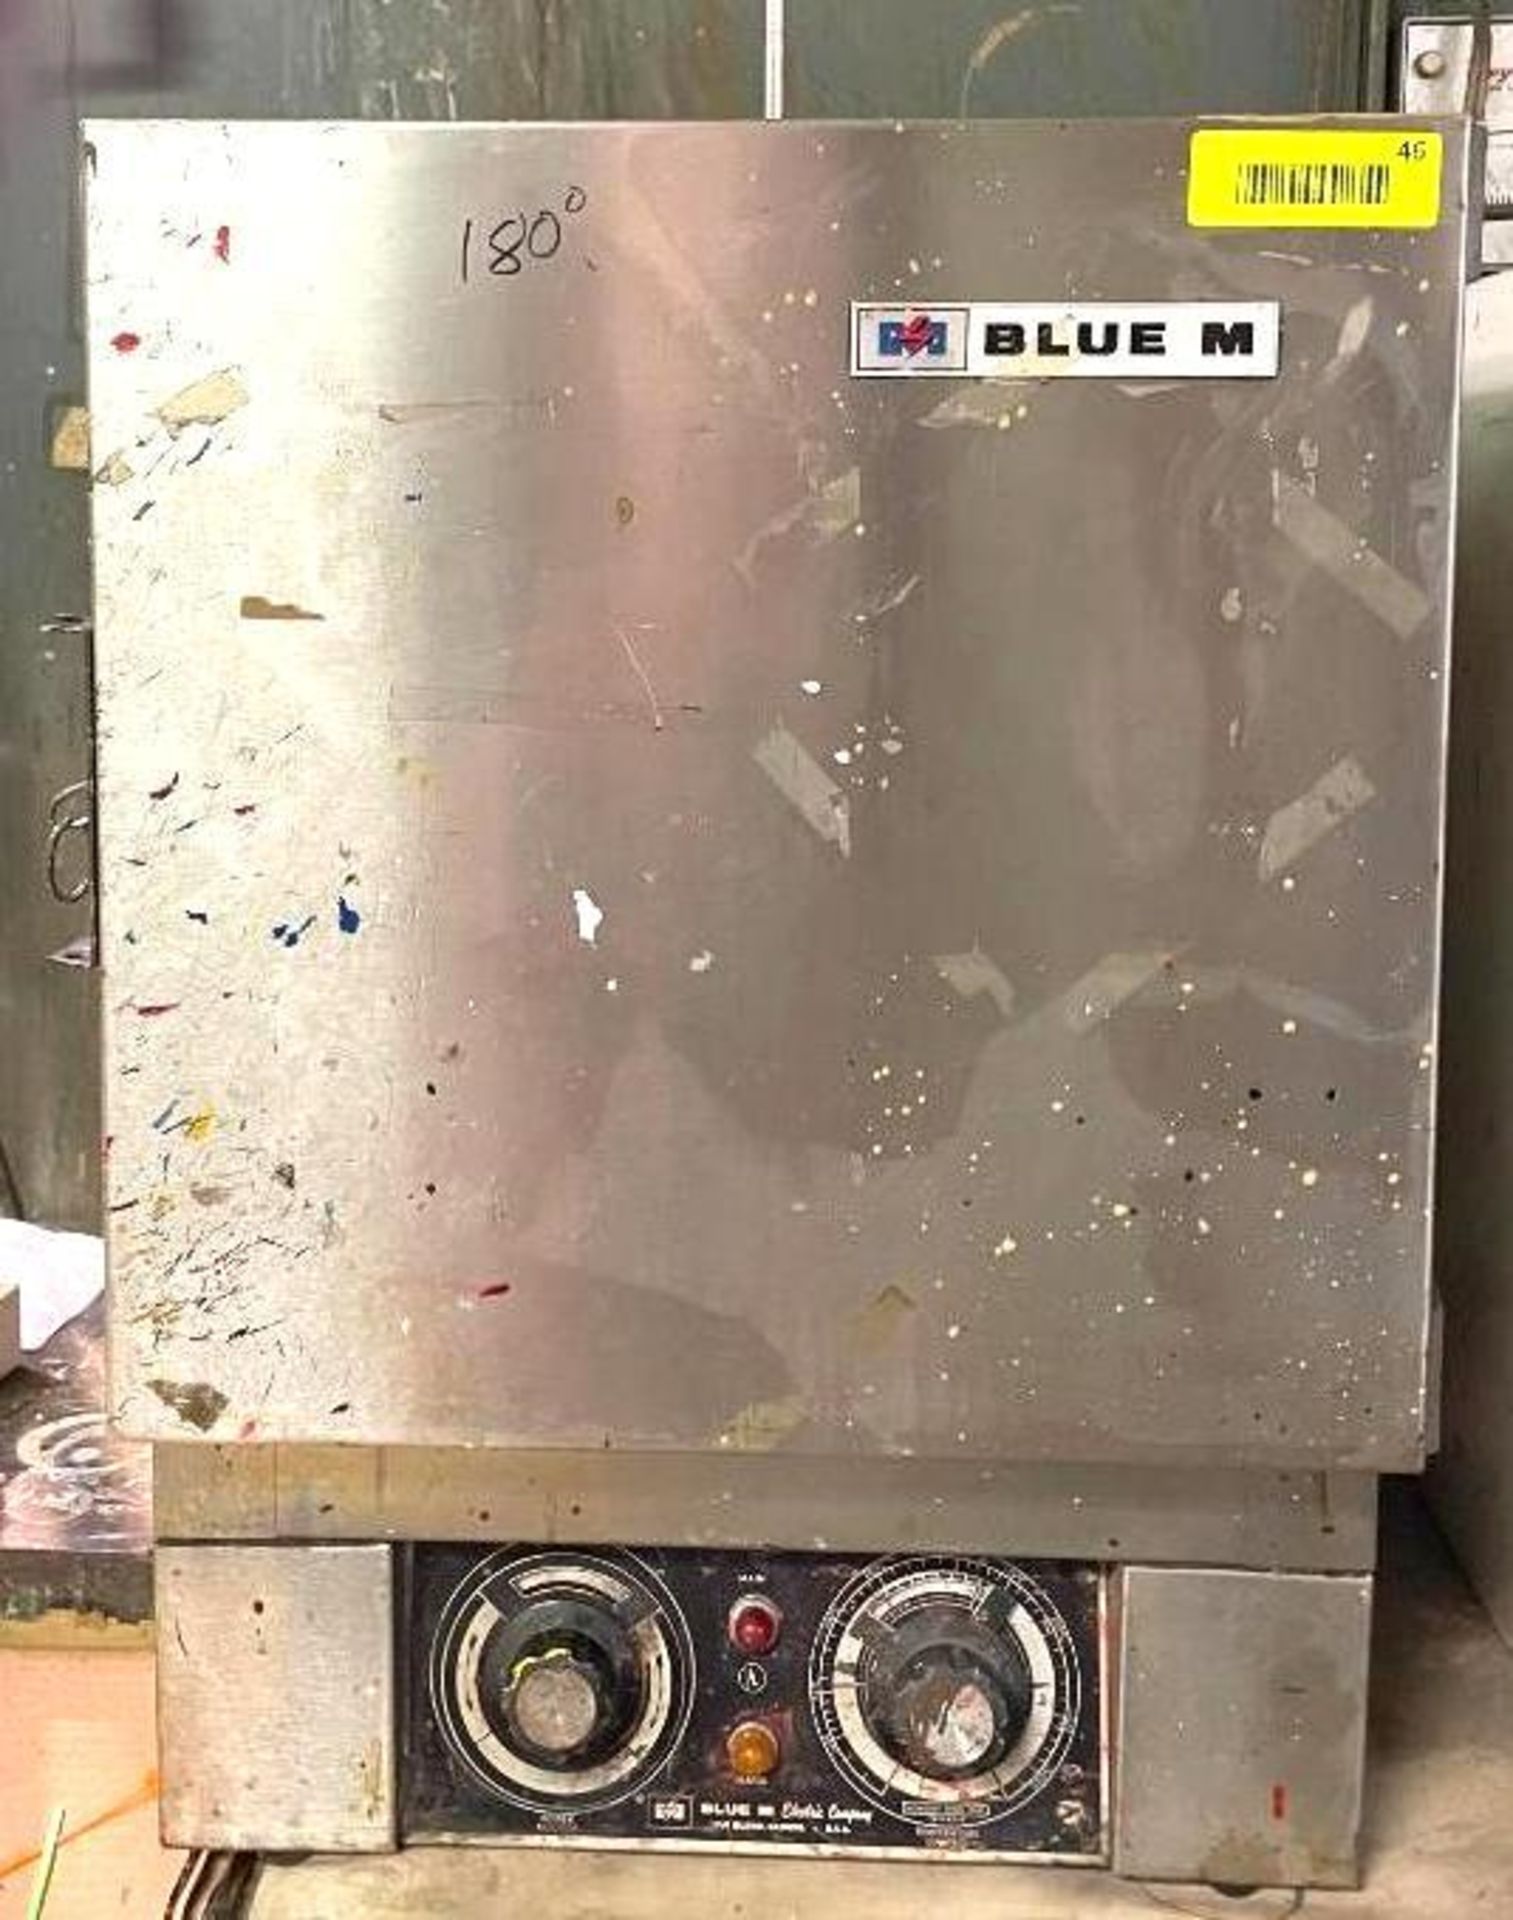 BLUE M STABIL-THERM LABORATORY GRAVITY OVEN 250 C BRAND/MODEL: BLUE M OV-12A INFORMATION: SERIAL NUM